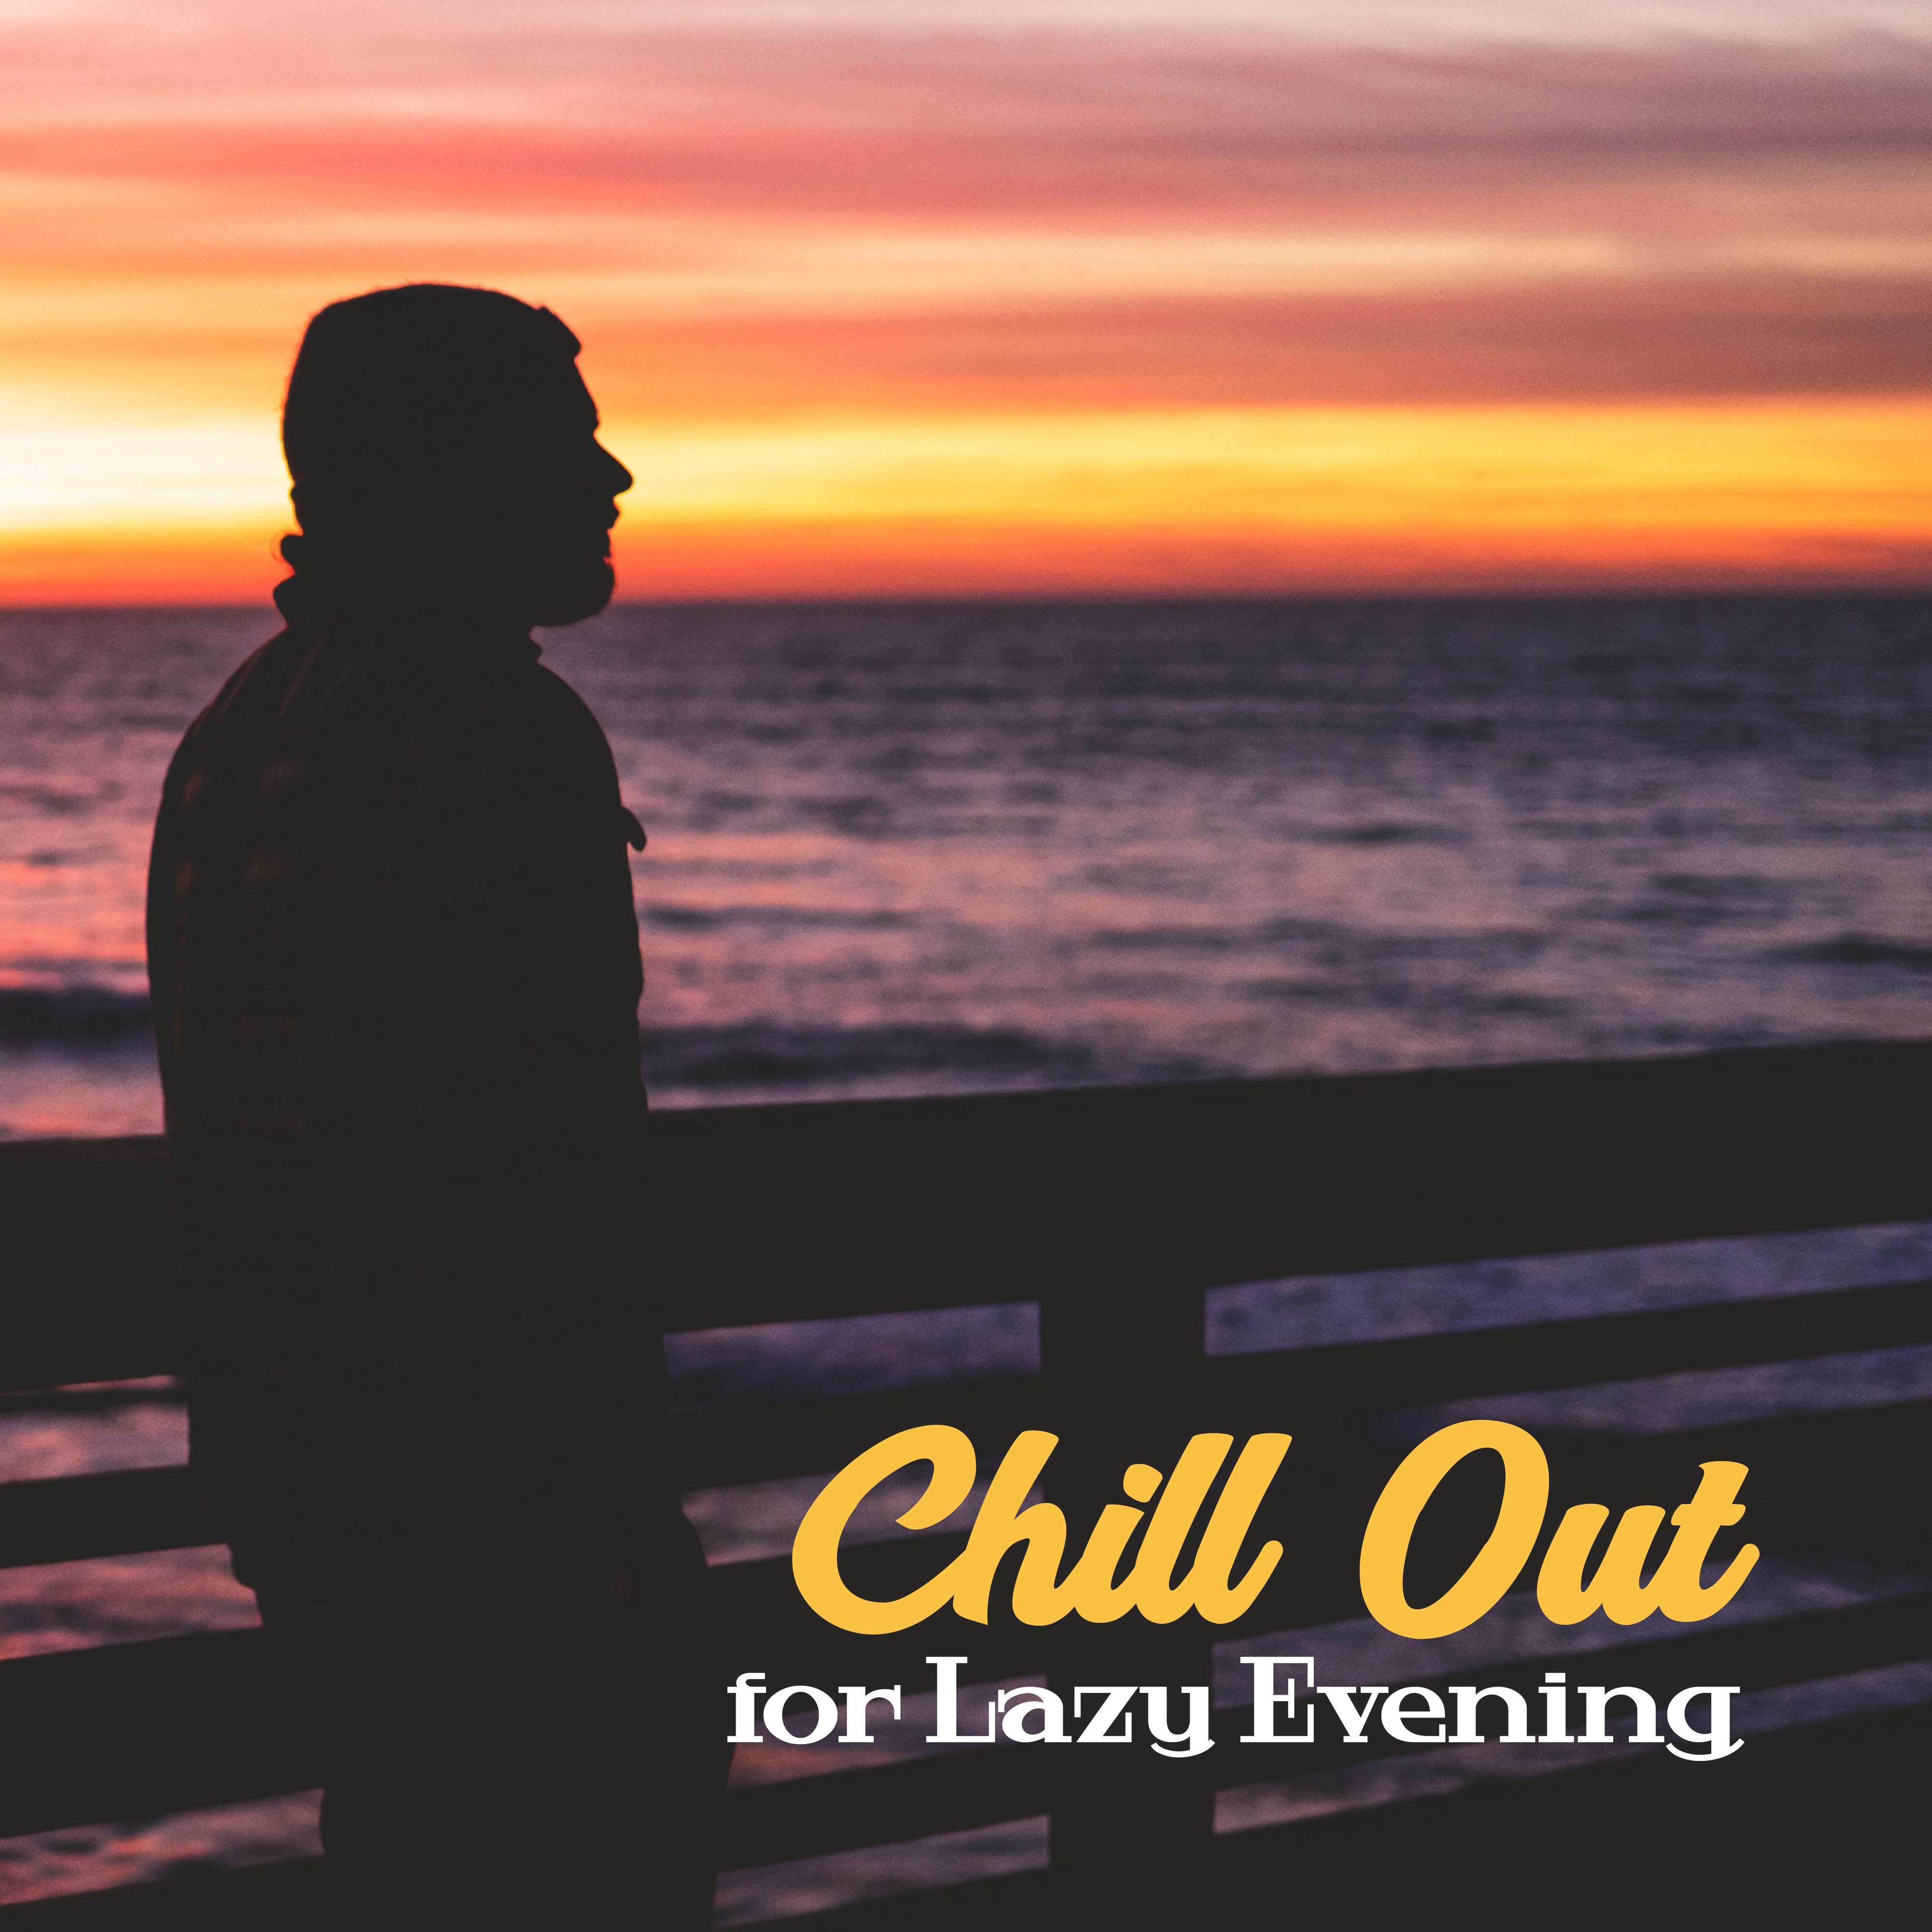 Chill Out for Lazy Evening  Calm Sounds to Relax, Chill Out Melodies, Evening Vibes, Stress Relief